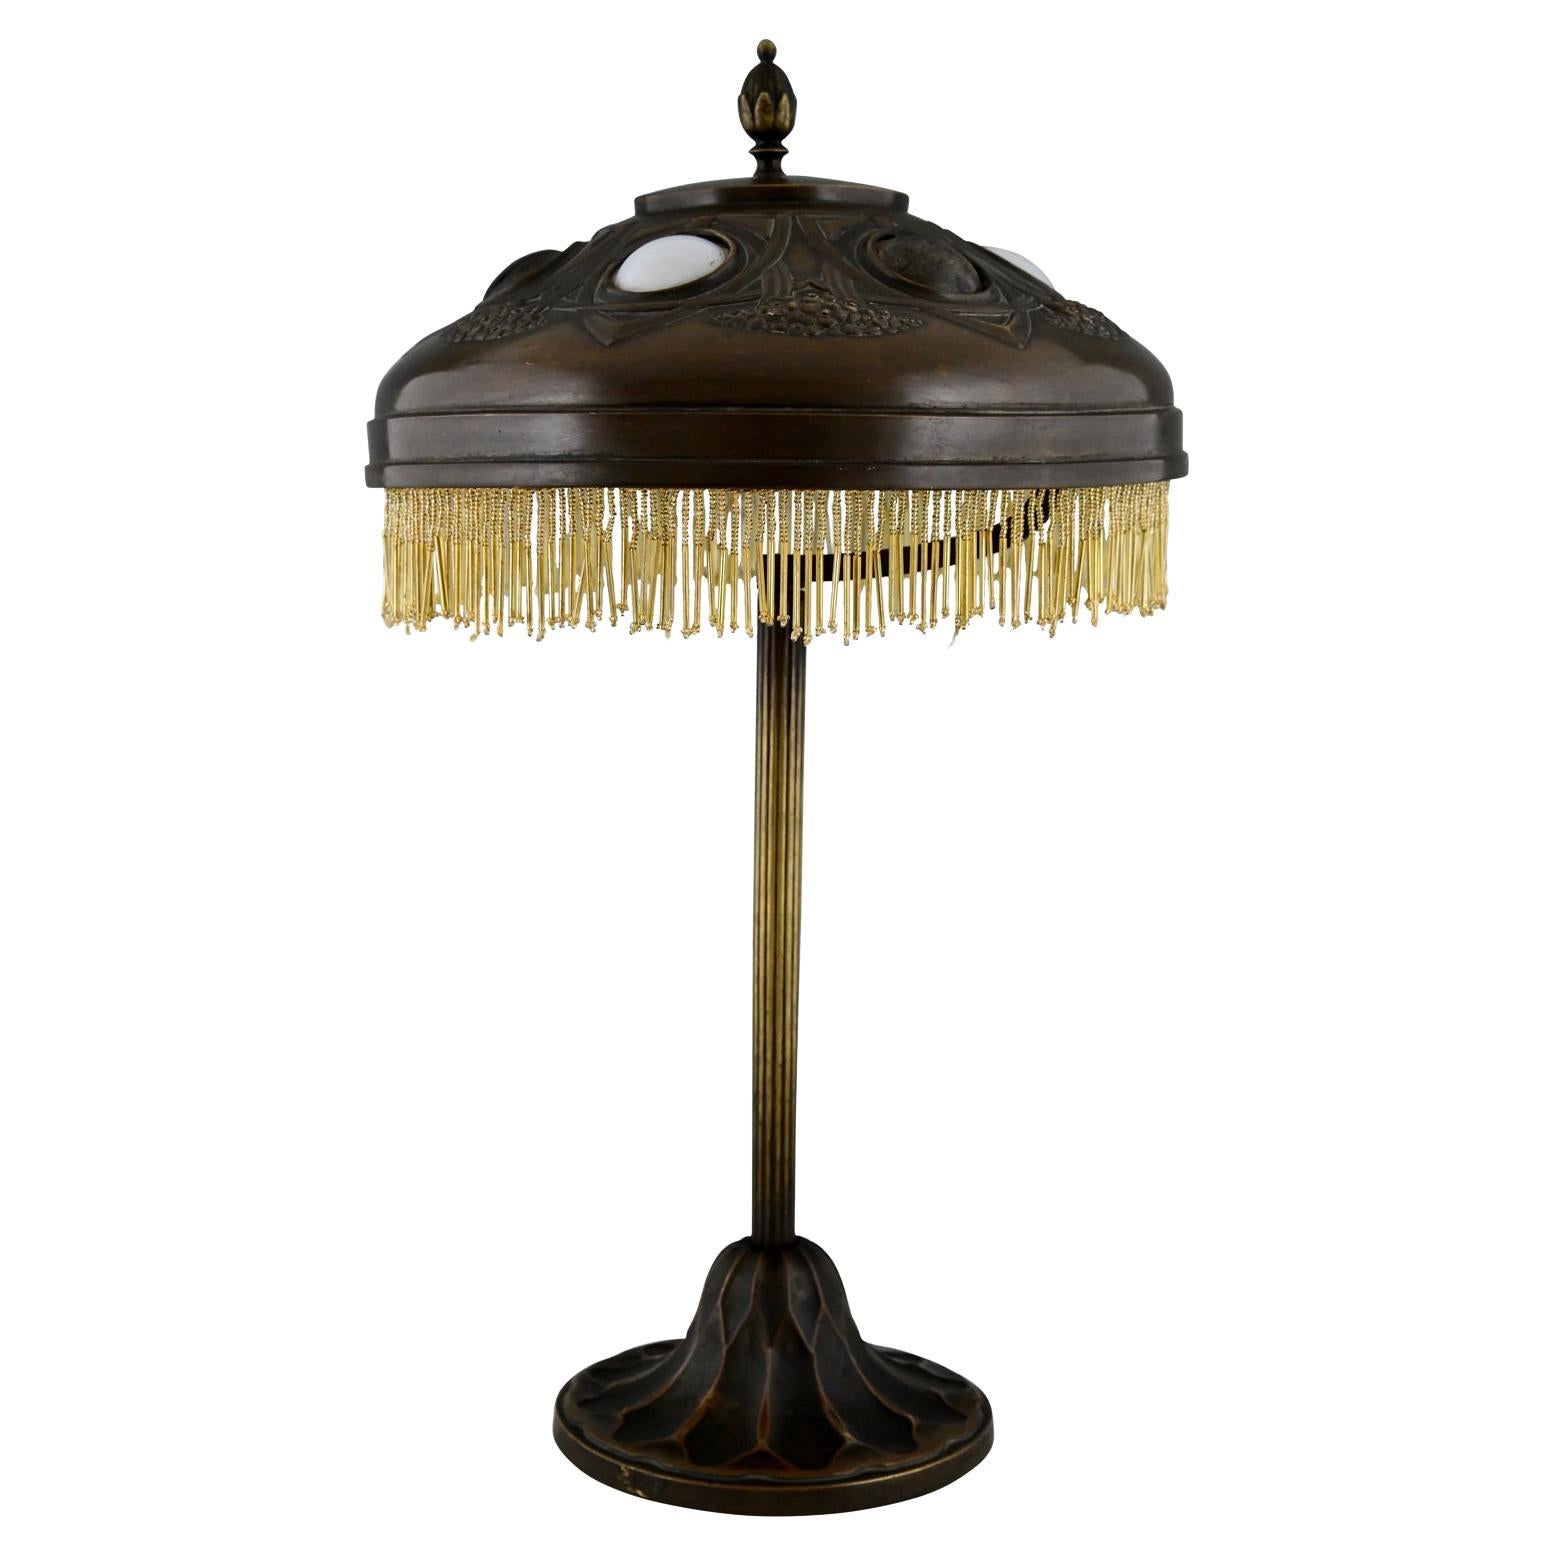 Art nouveau desk lamp in patinated bronze hammered brass & glas shade 1900